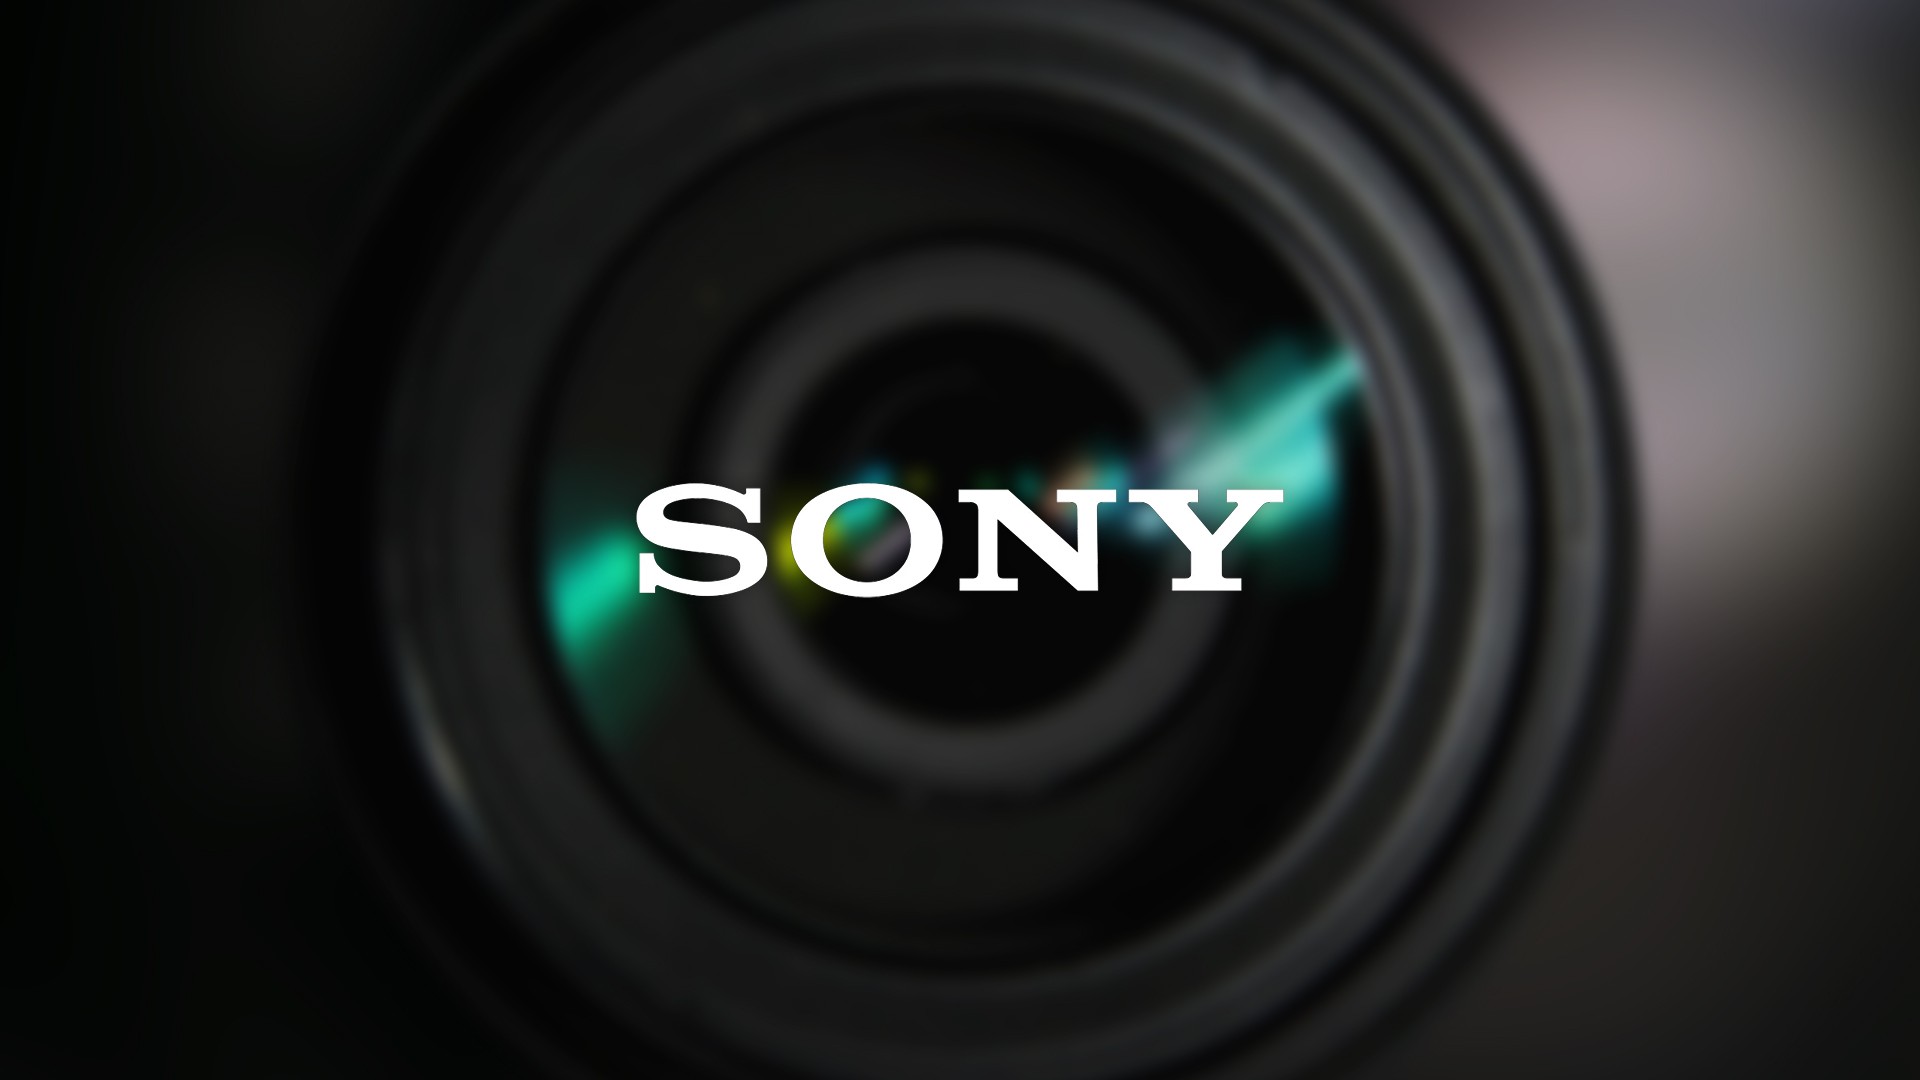 Sony introduces new technology of stacked image sensors that "see in the dark"